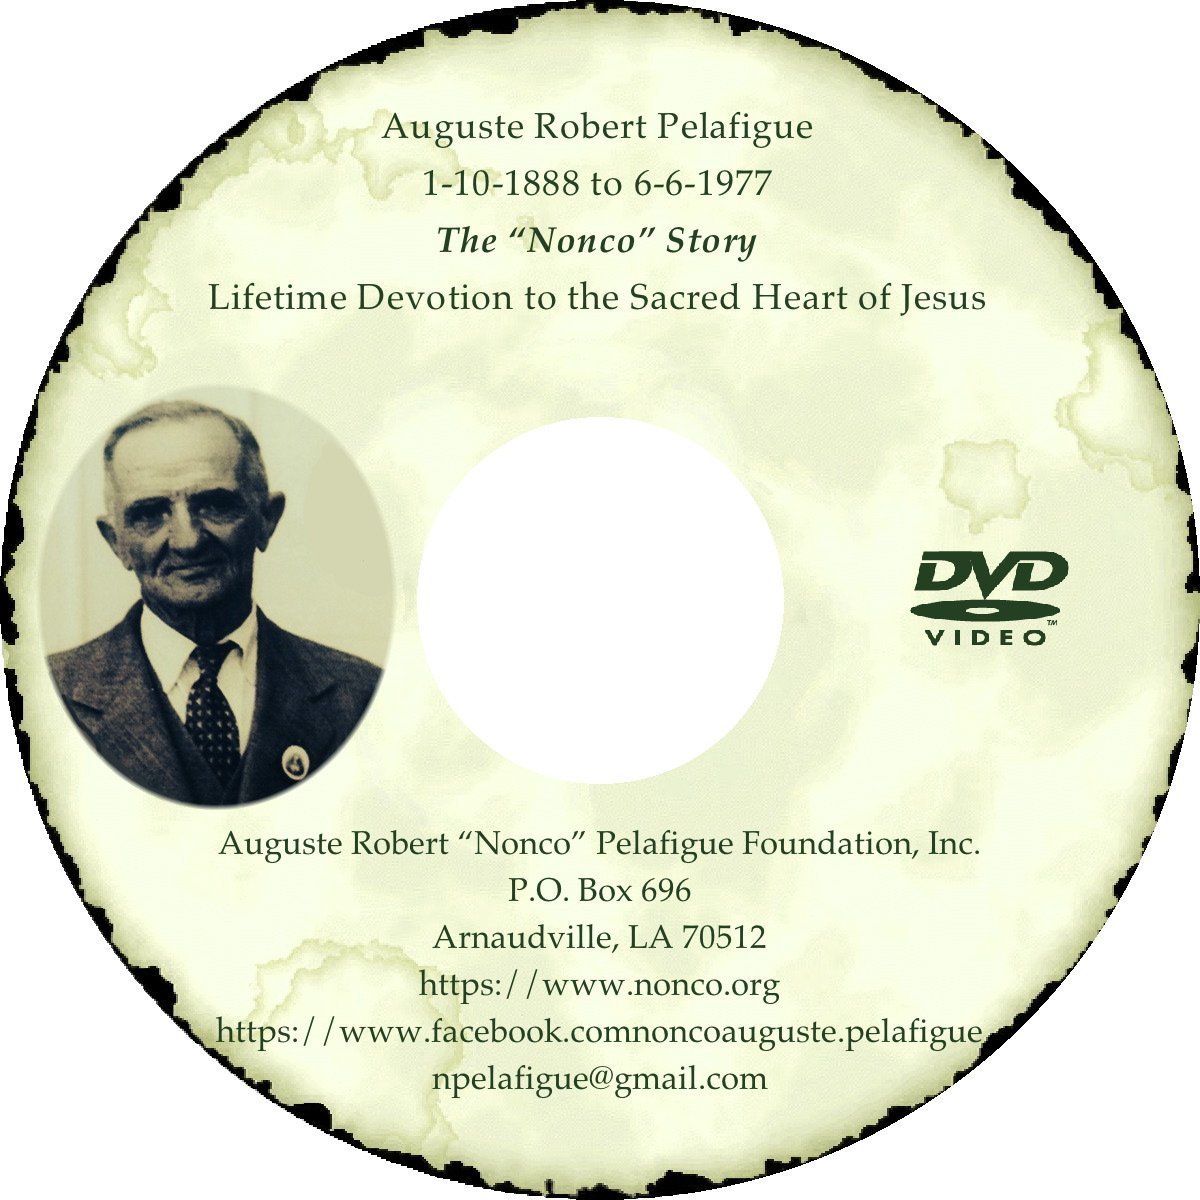 The Nonco Story DVD